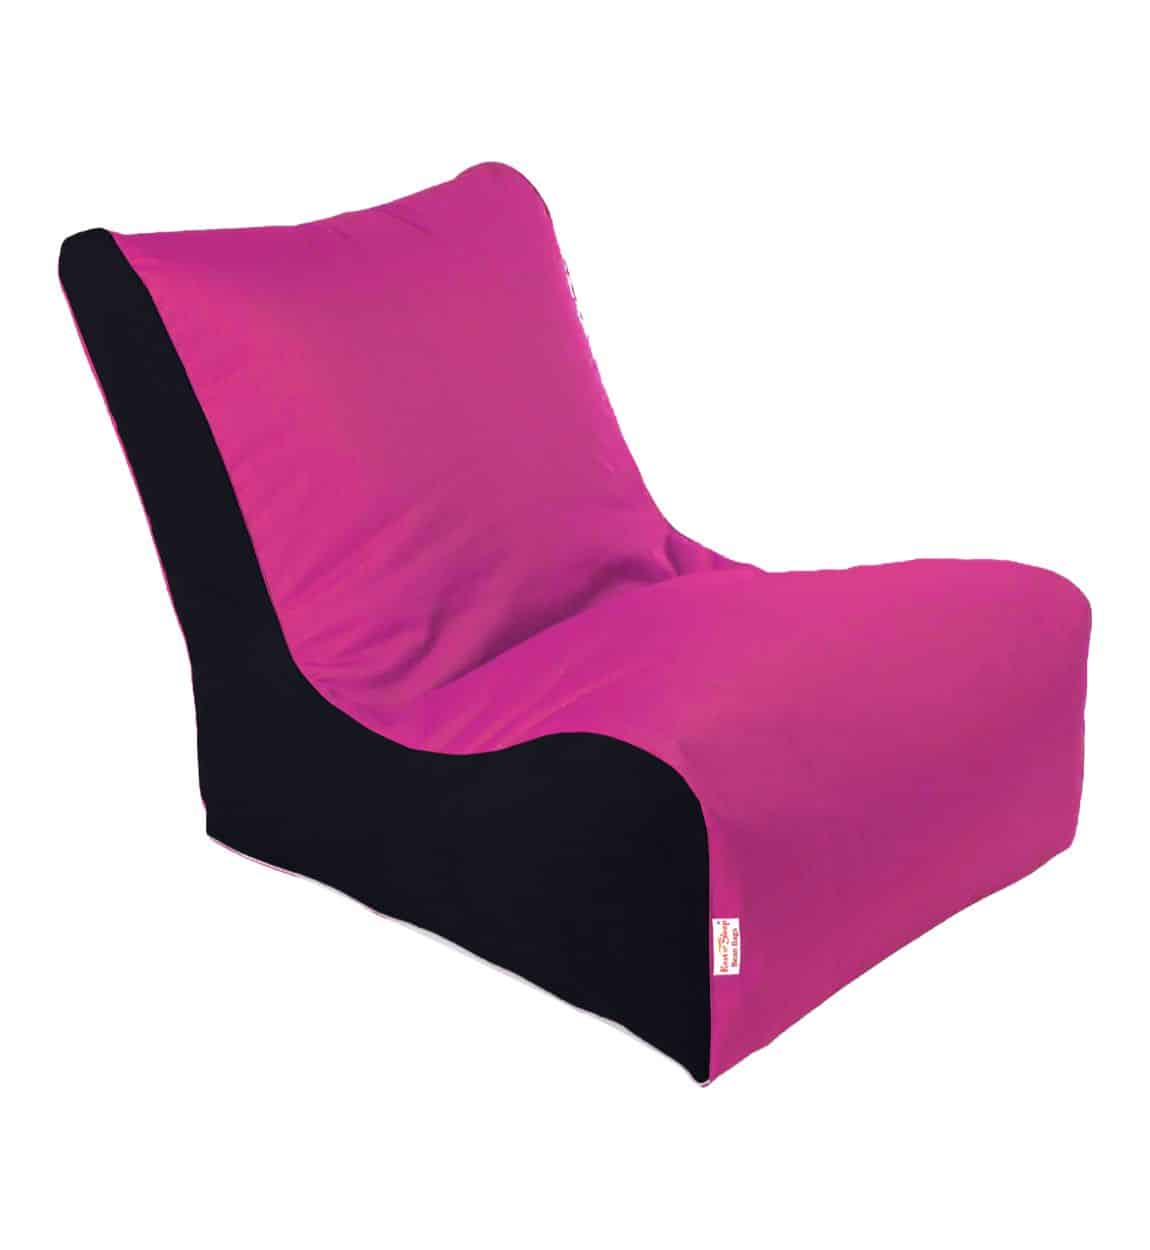 Black and pink lounger 